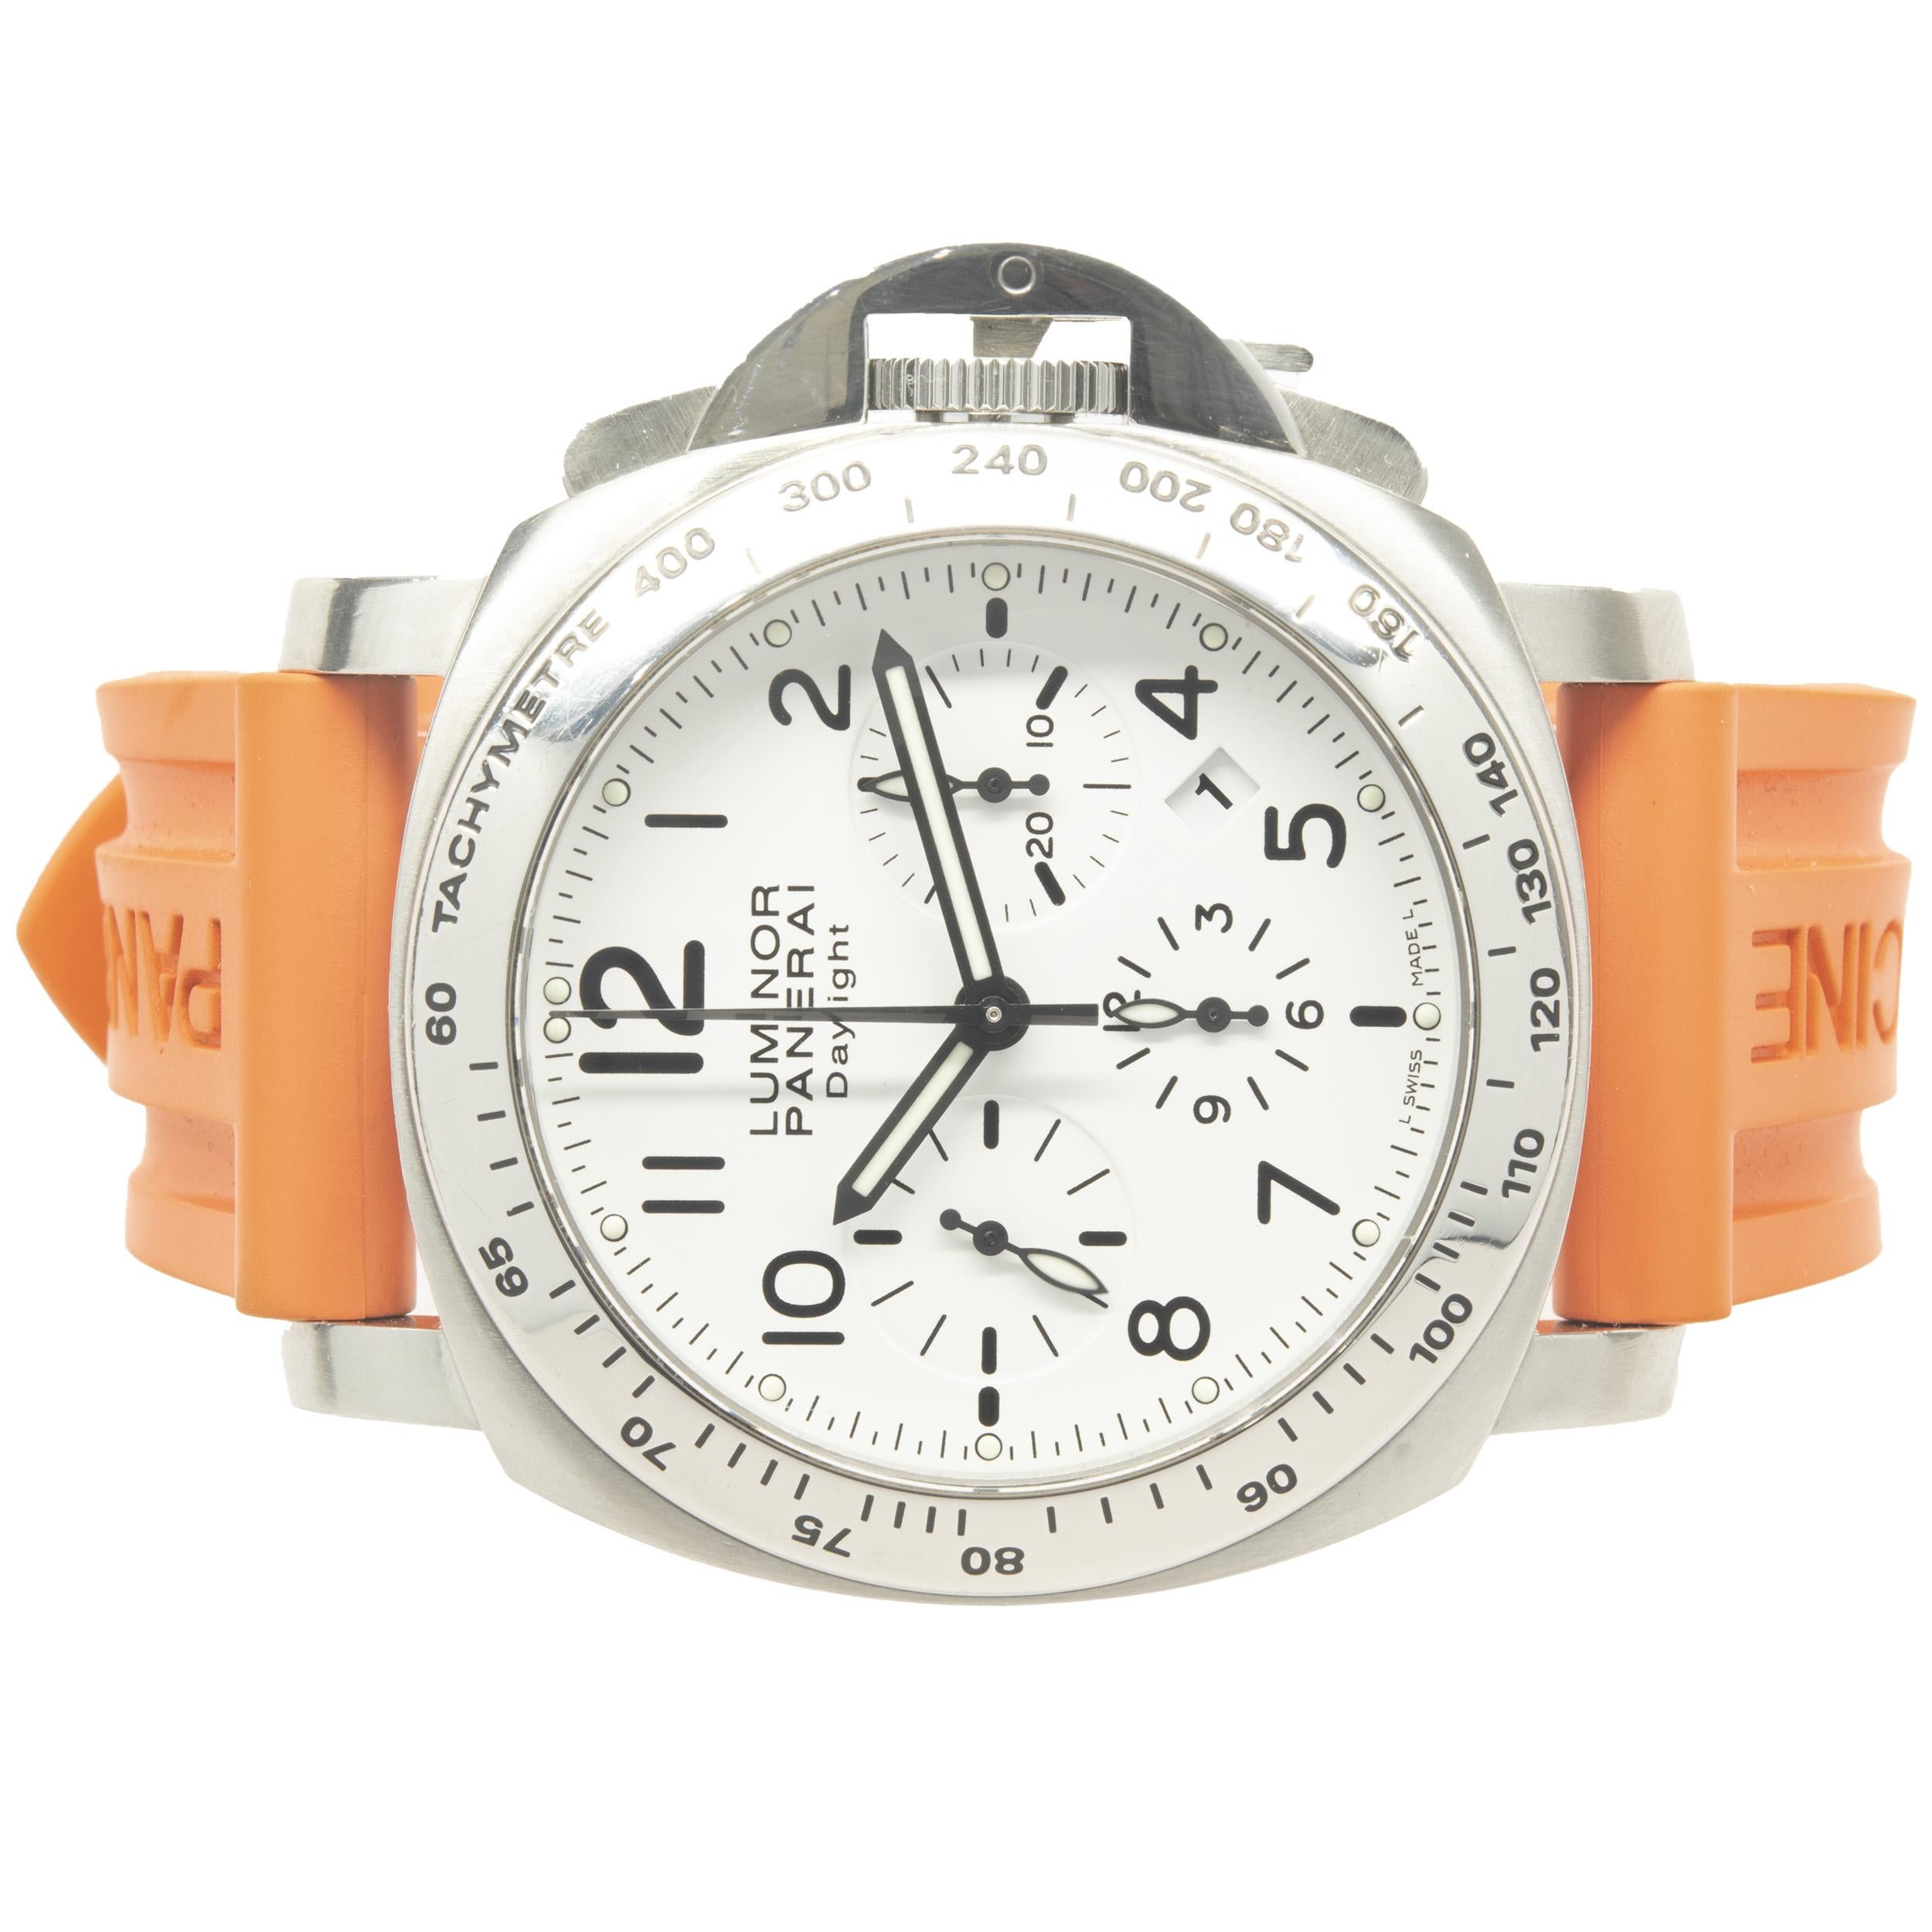 Movement: automatic
Function: hour, minute, small seconds, date, chronograph
Case: 44mm stainless steel case, sapphire crystal, tachymeter bezel, push-pull crown
Band: orange rubber strap, deployment clasp
Dial: white arabic chronograph
Reference: